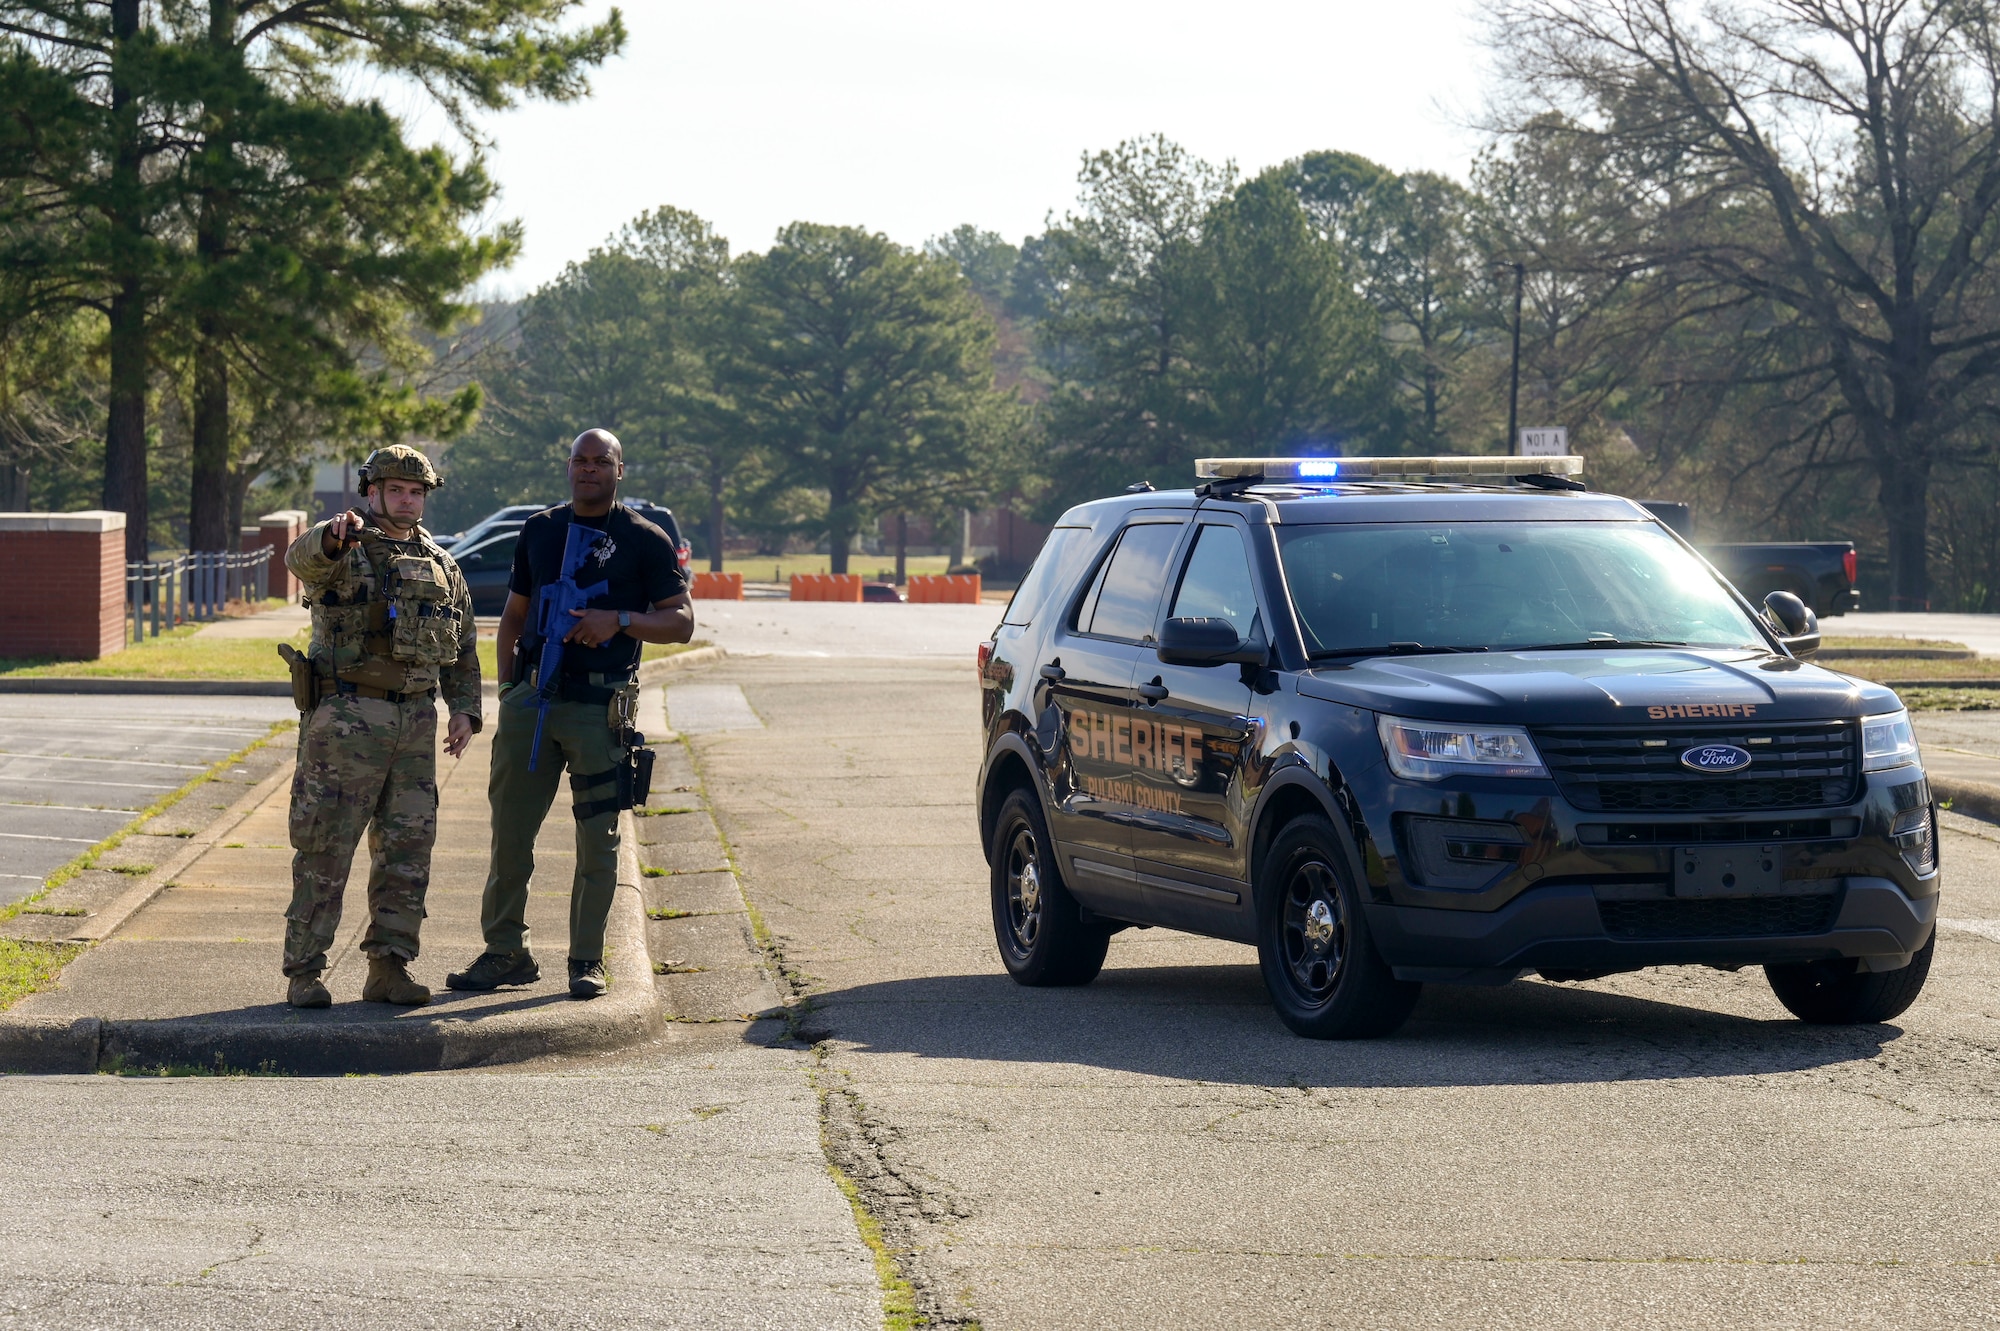 An Airman assigned to the 19th Security Forces Squadron discusses a security threat with a member of the Pulaski County Sheriff’s Office